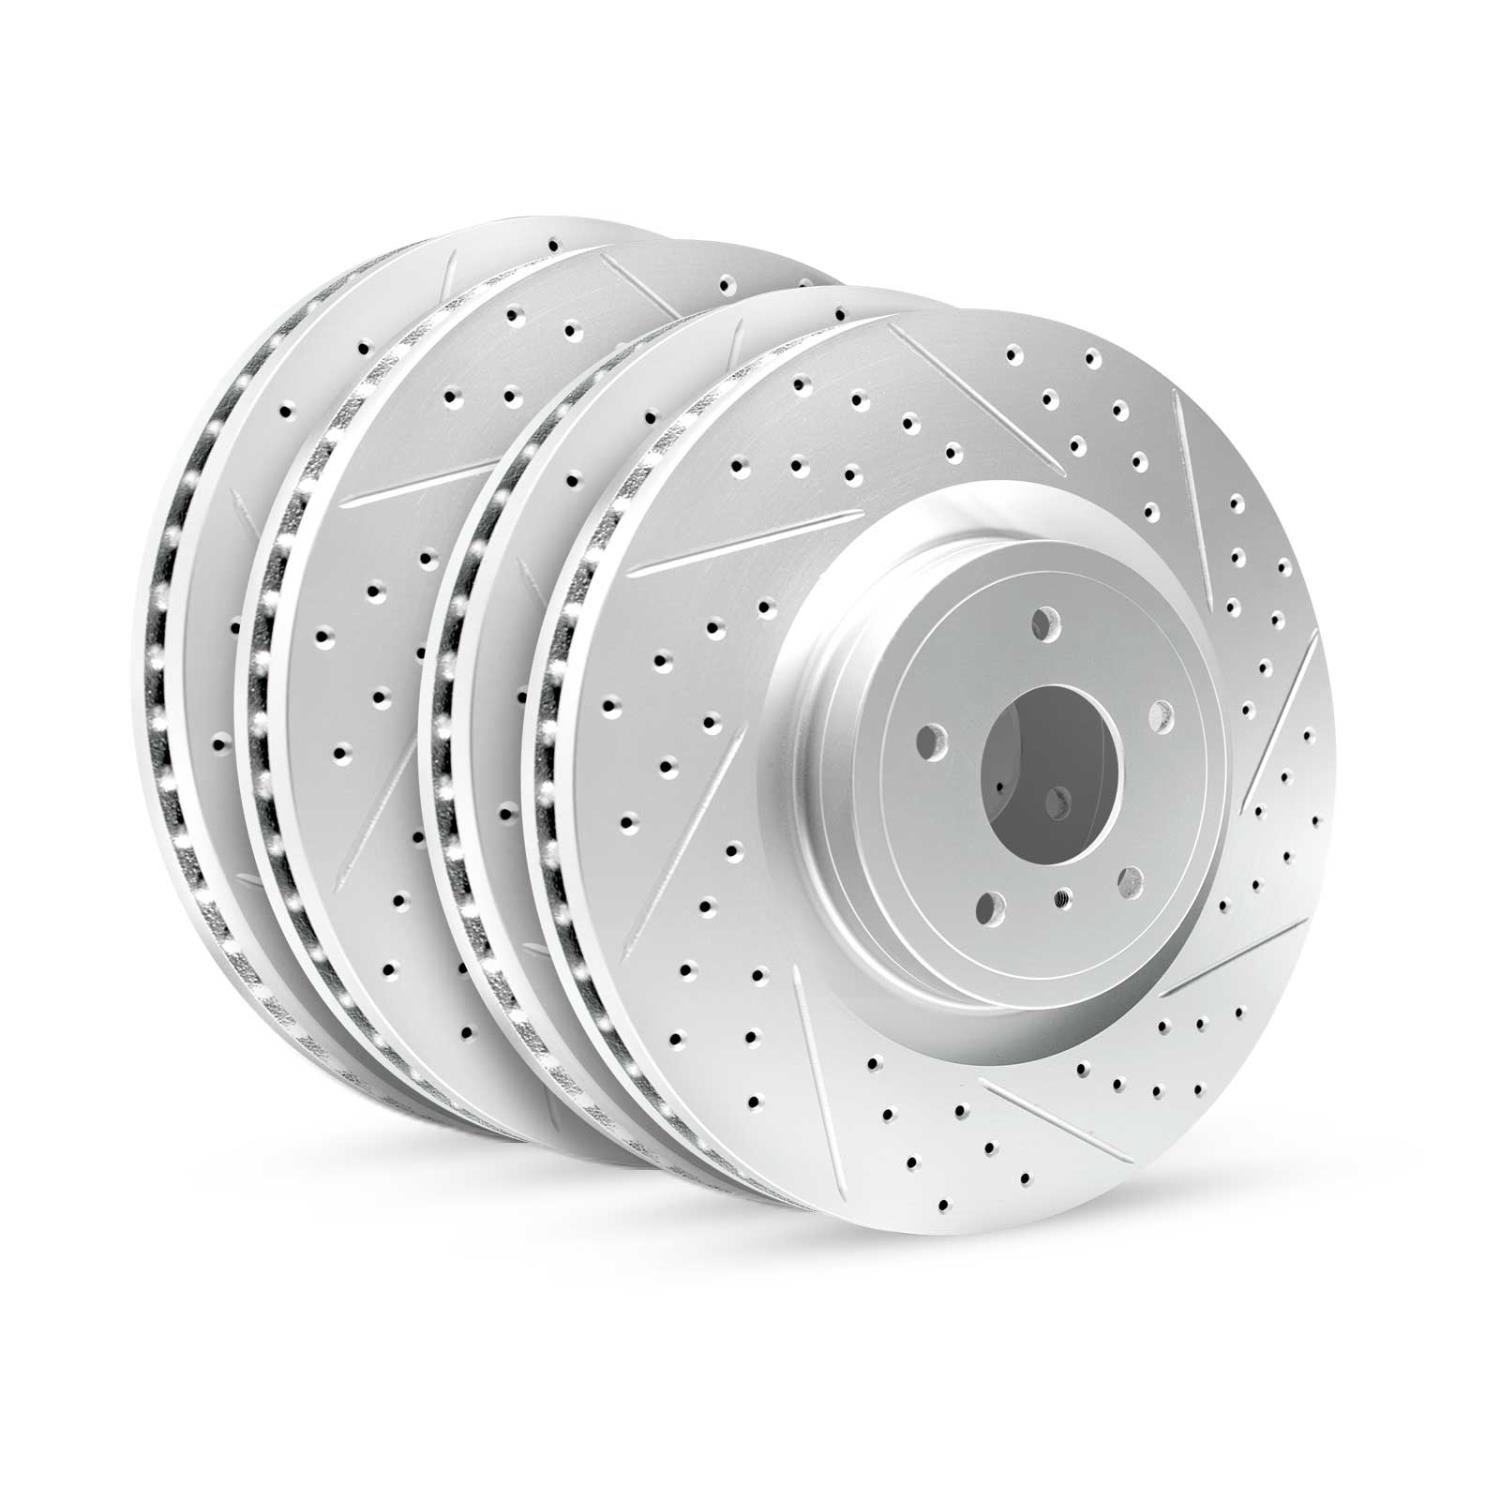 GEO-Carbon Drilled/Slotted Rotors, 1996-2003 BMW, Position: Front/Rear